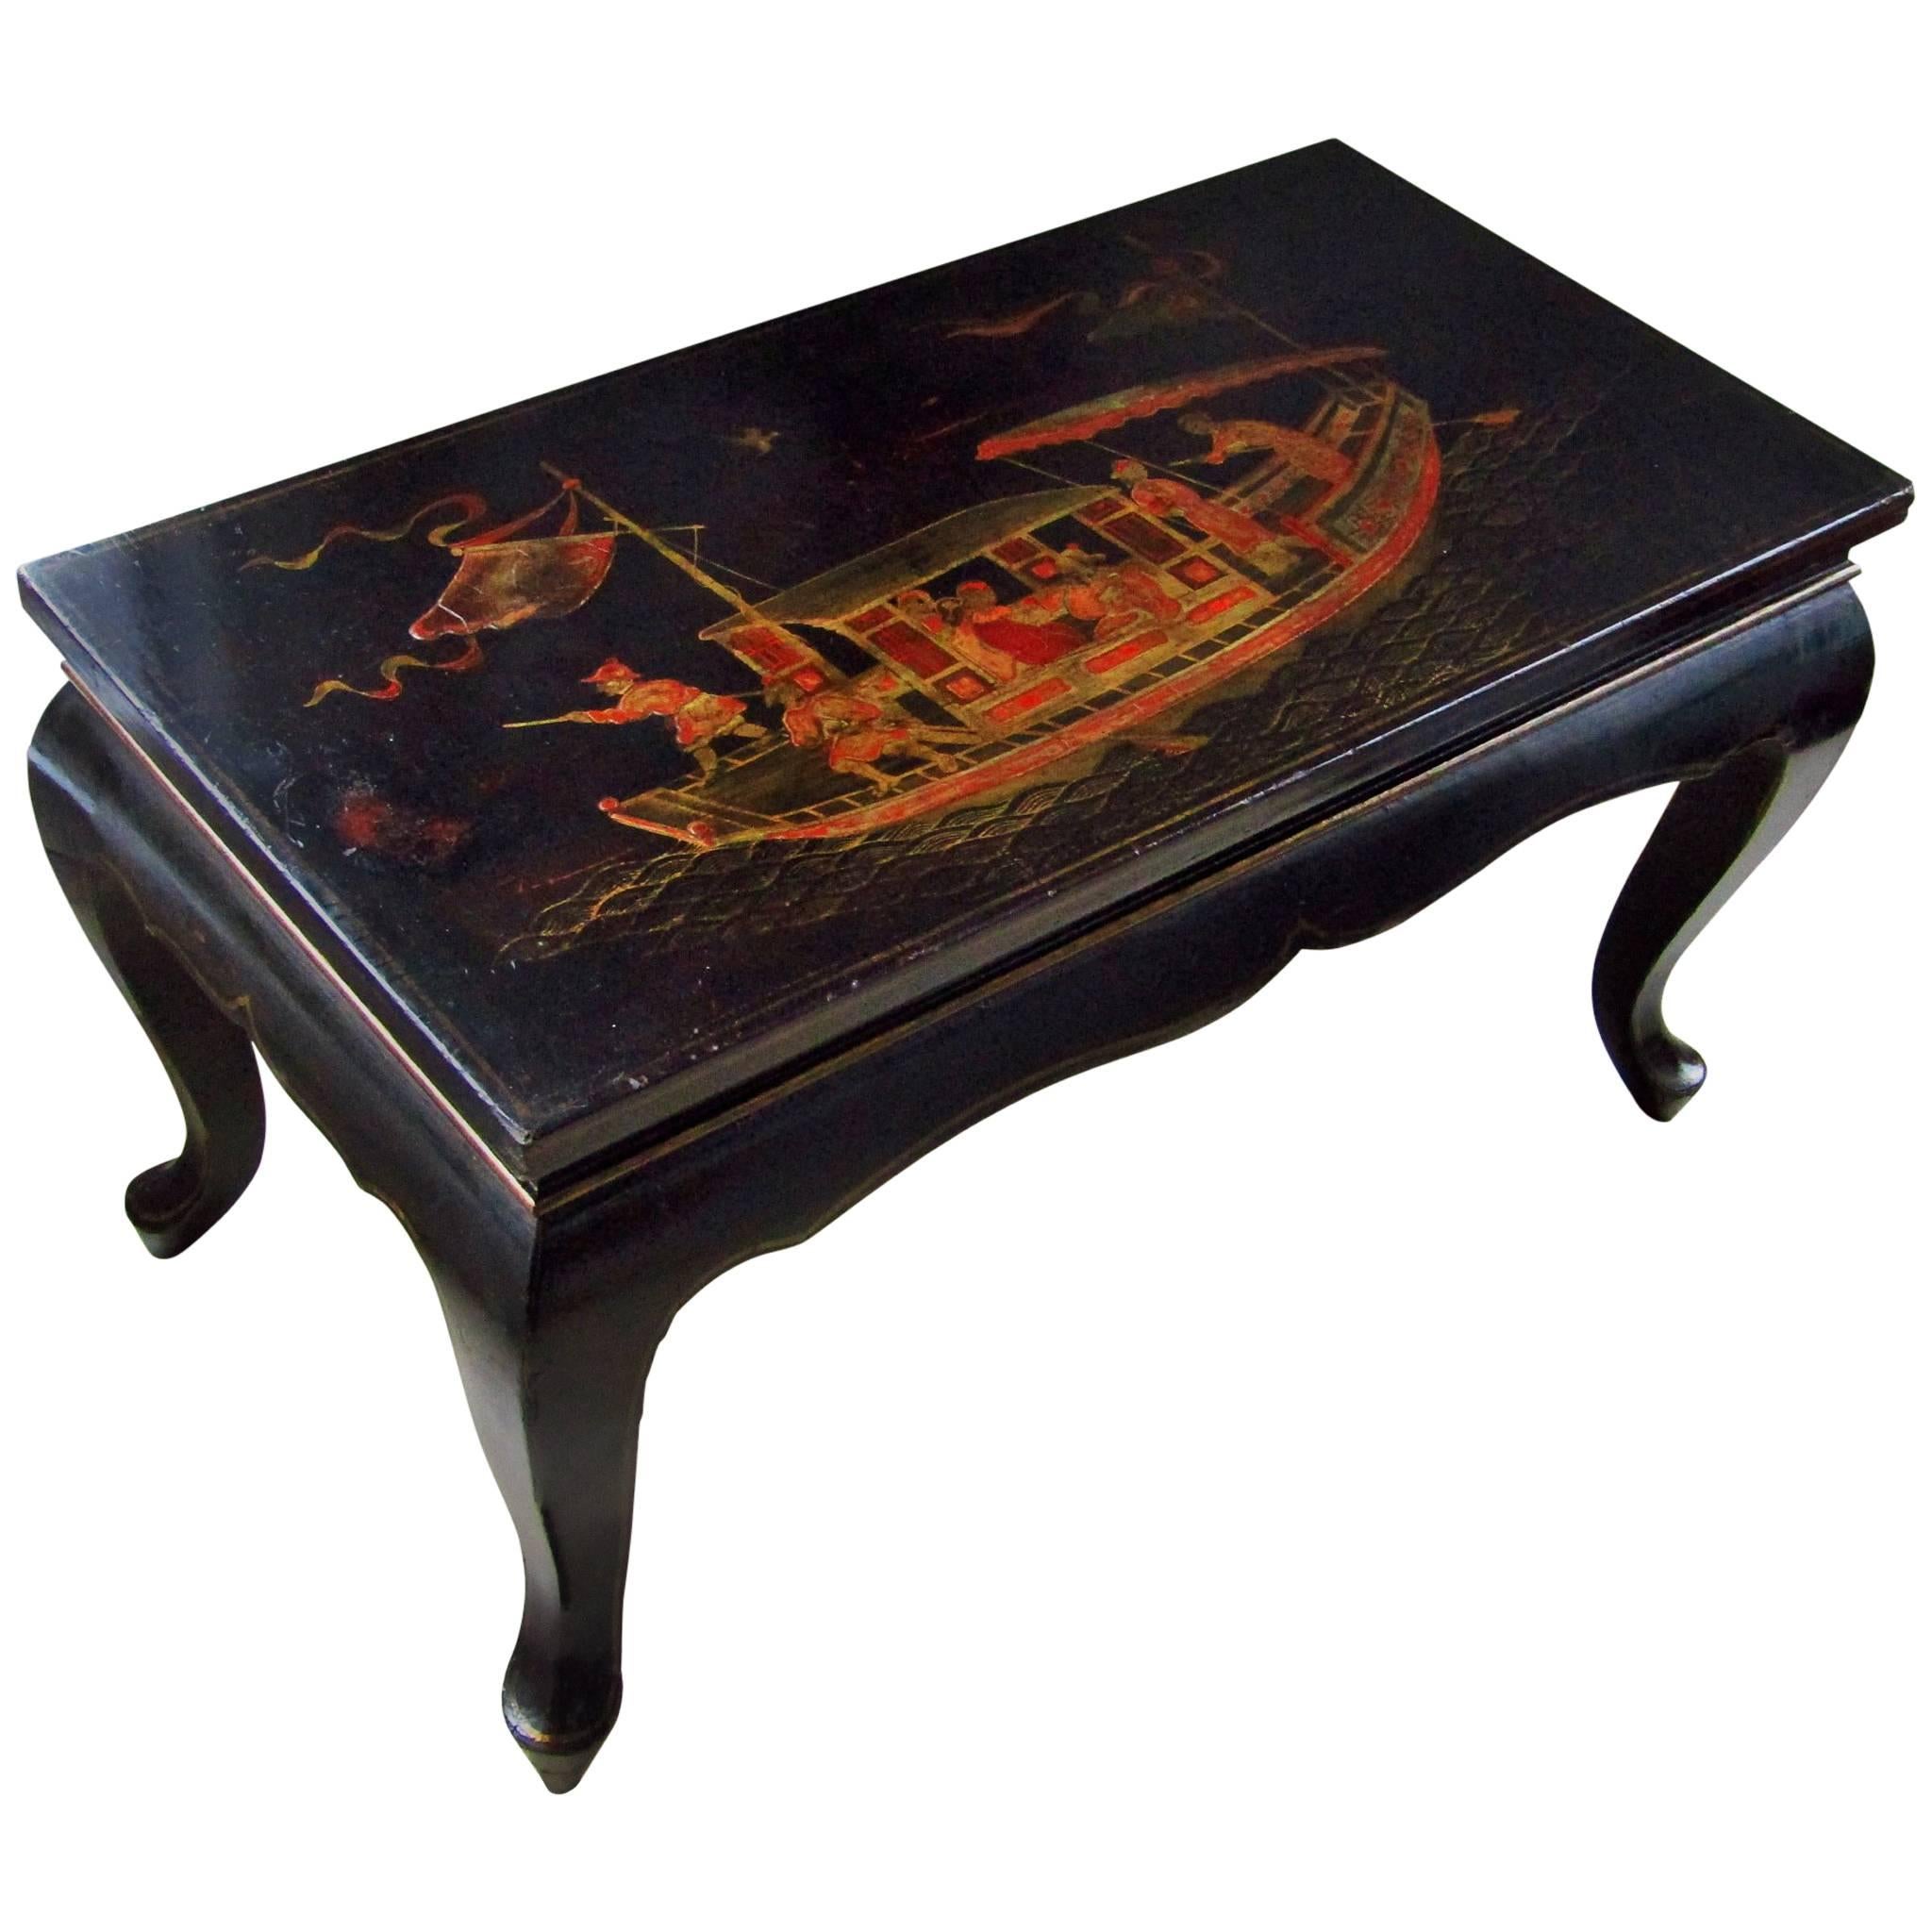 Art Deco Coffee Opium Table with Chinese Decor